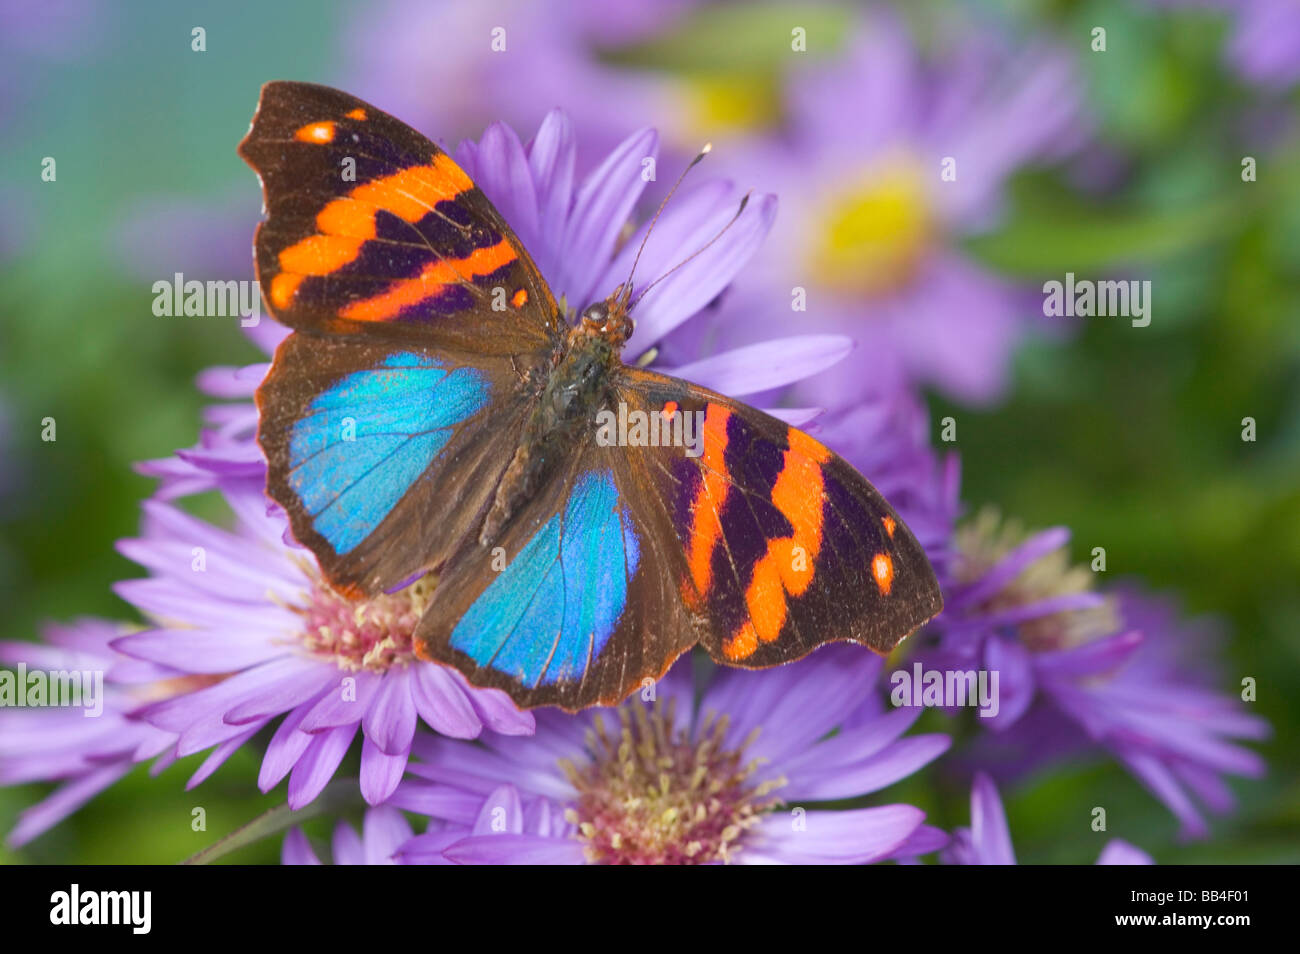 Sammamish Washington Photograph of Butterfly on Flowers,  Epiphile orea the Orea Banner Butterfly Stock Photo